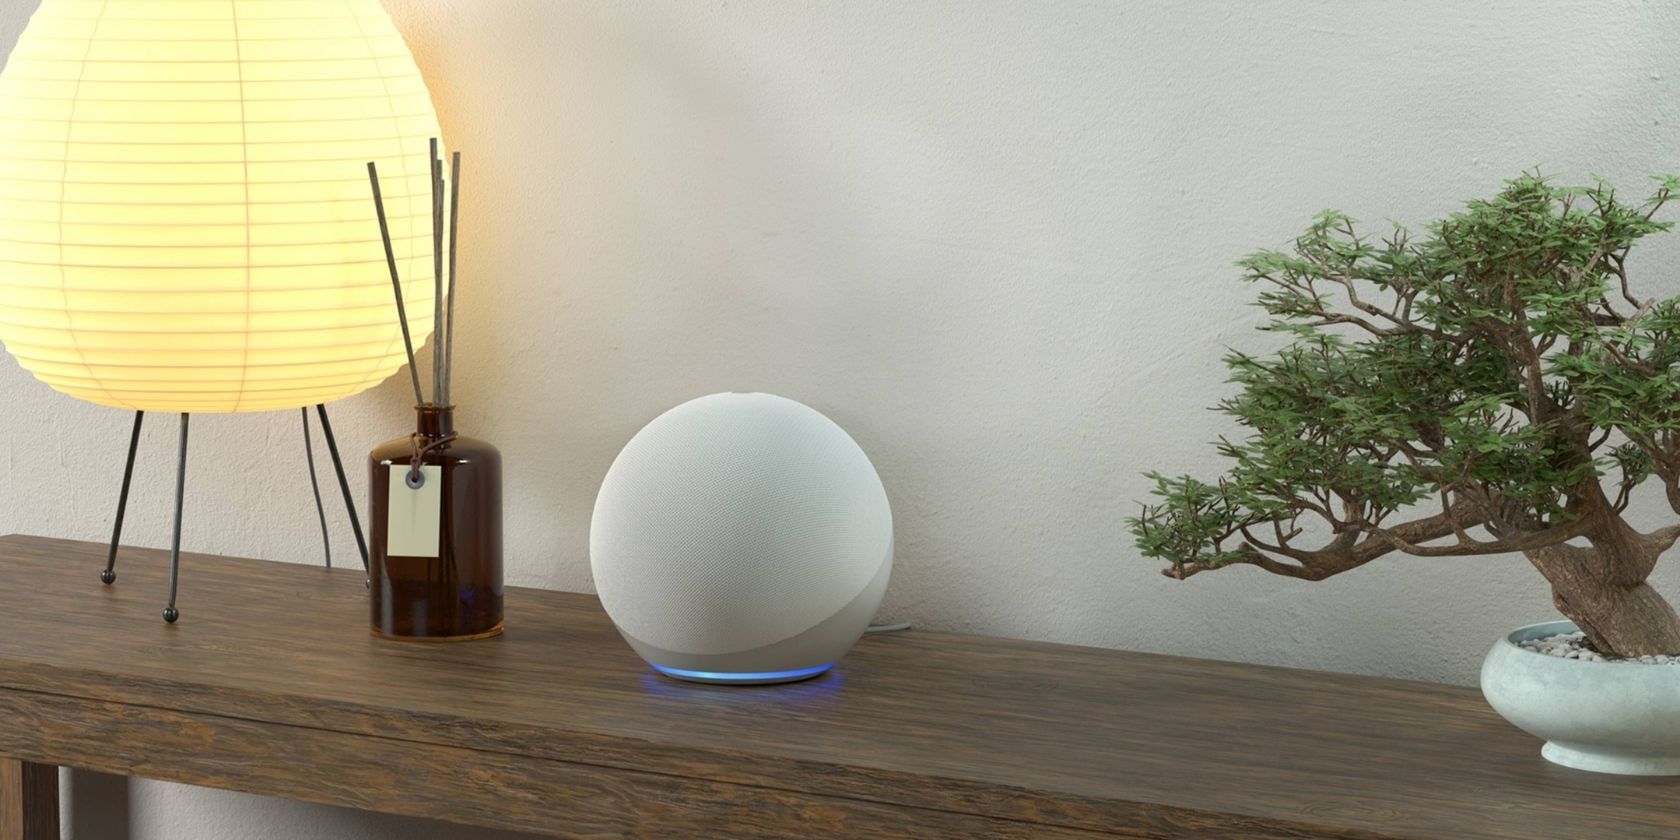 The Amazon Echo, a table lamp, and potted plant on a table stand